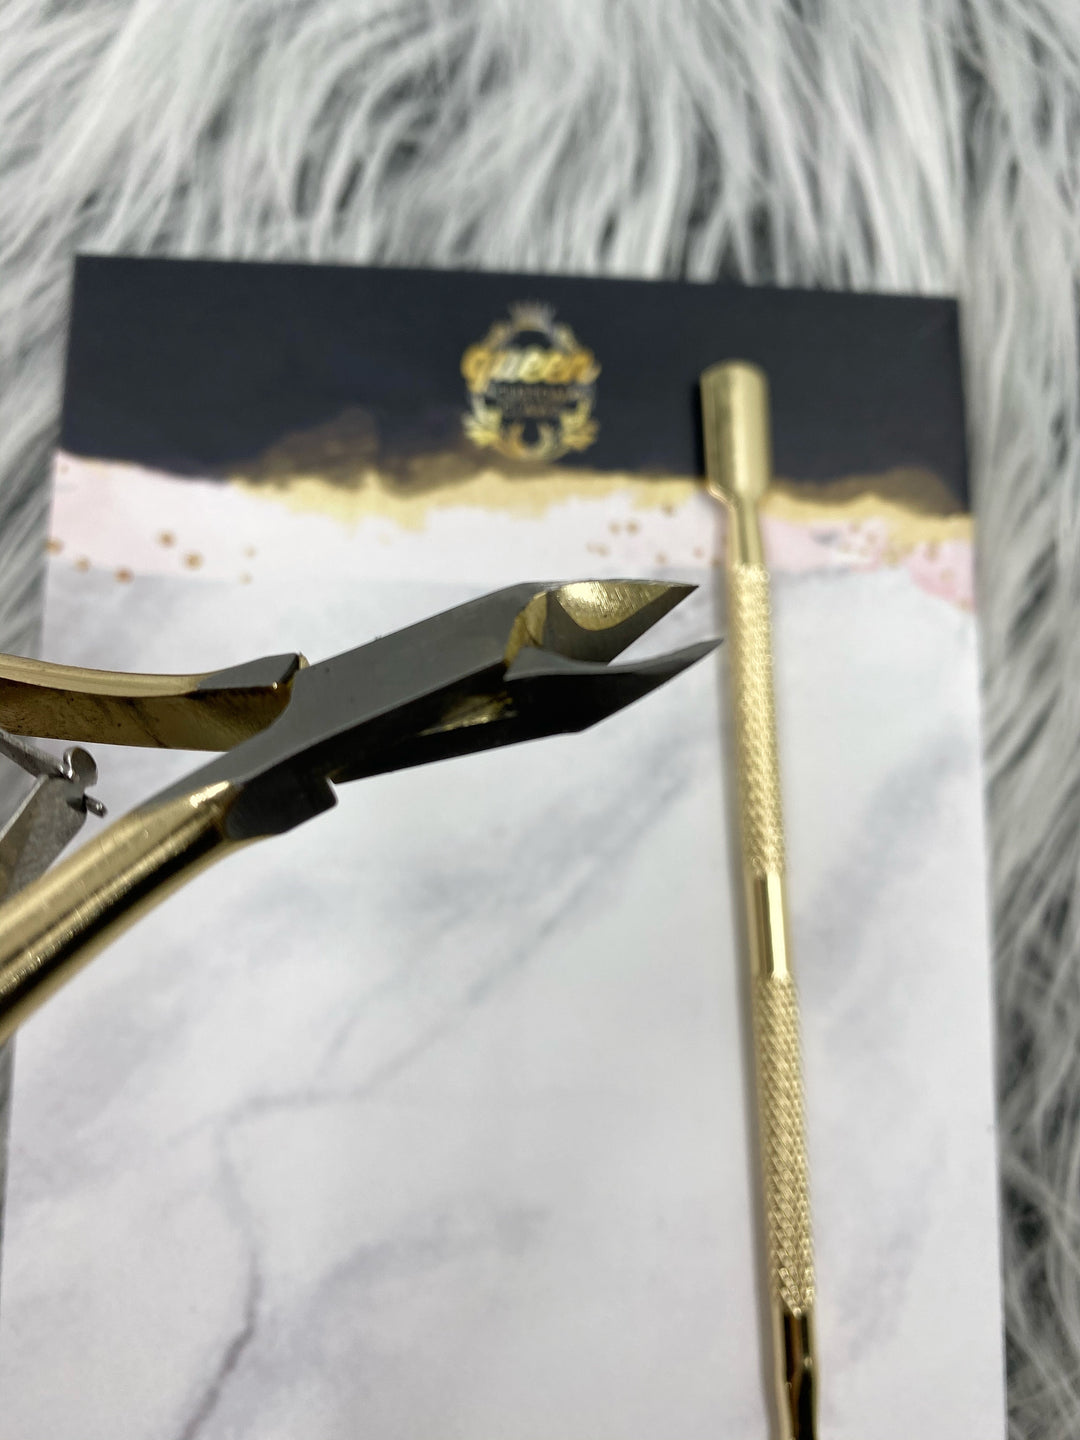 Stay Golden: Cuticle nippers & pusher prep kit for press-on nails